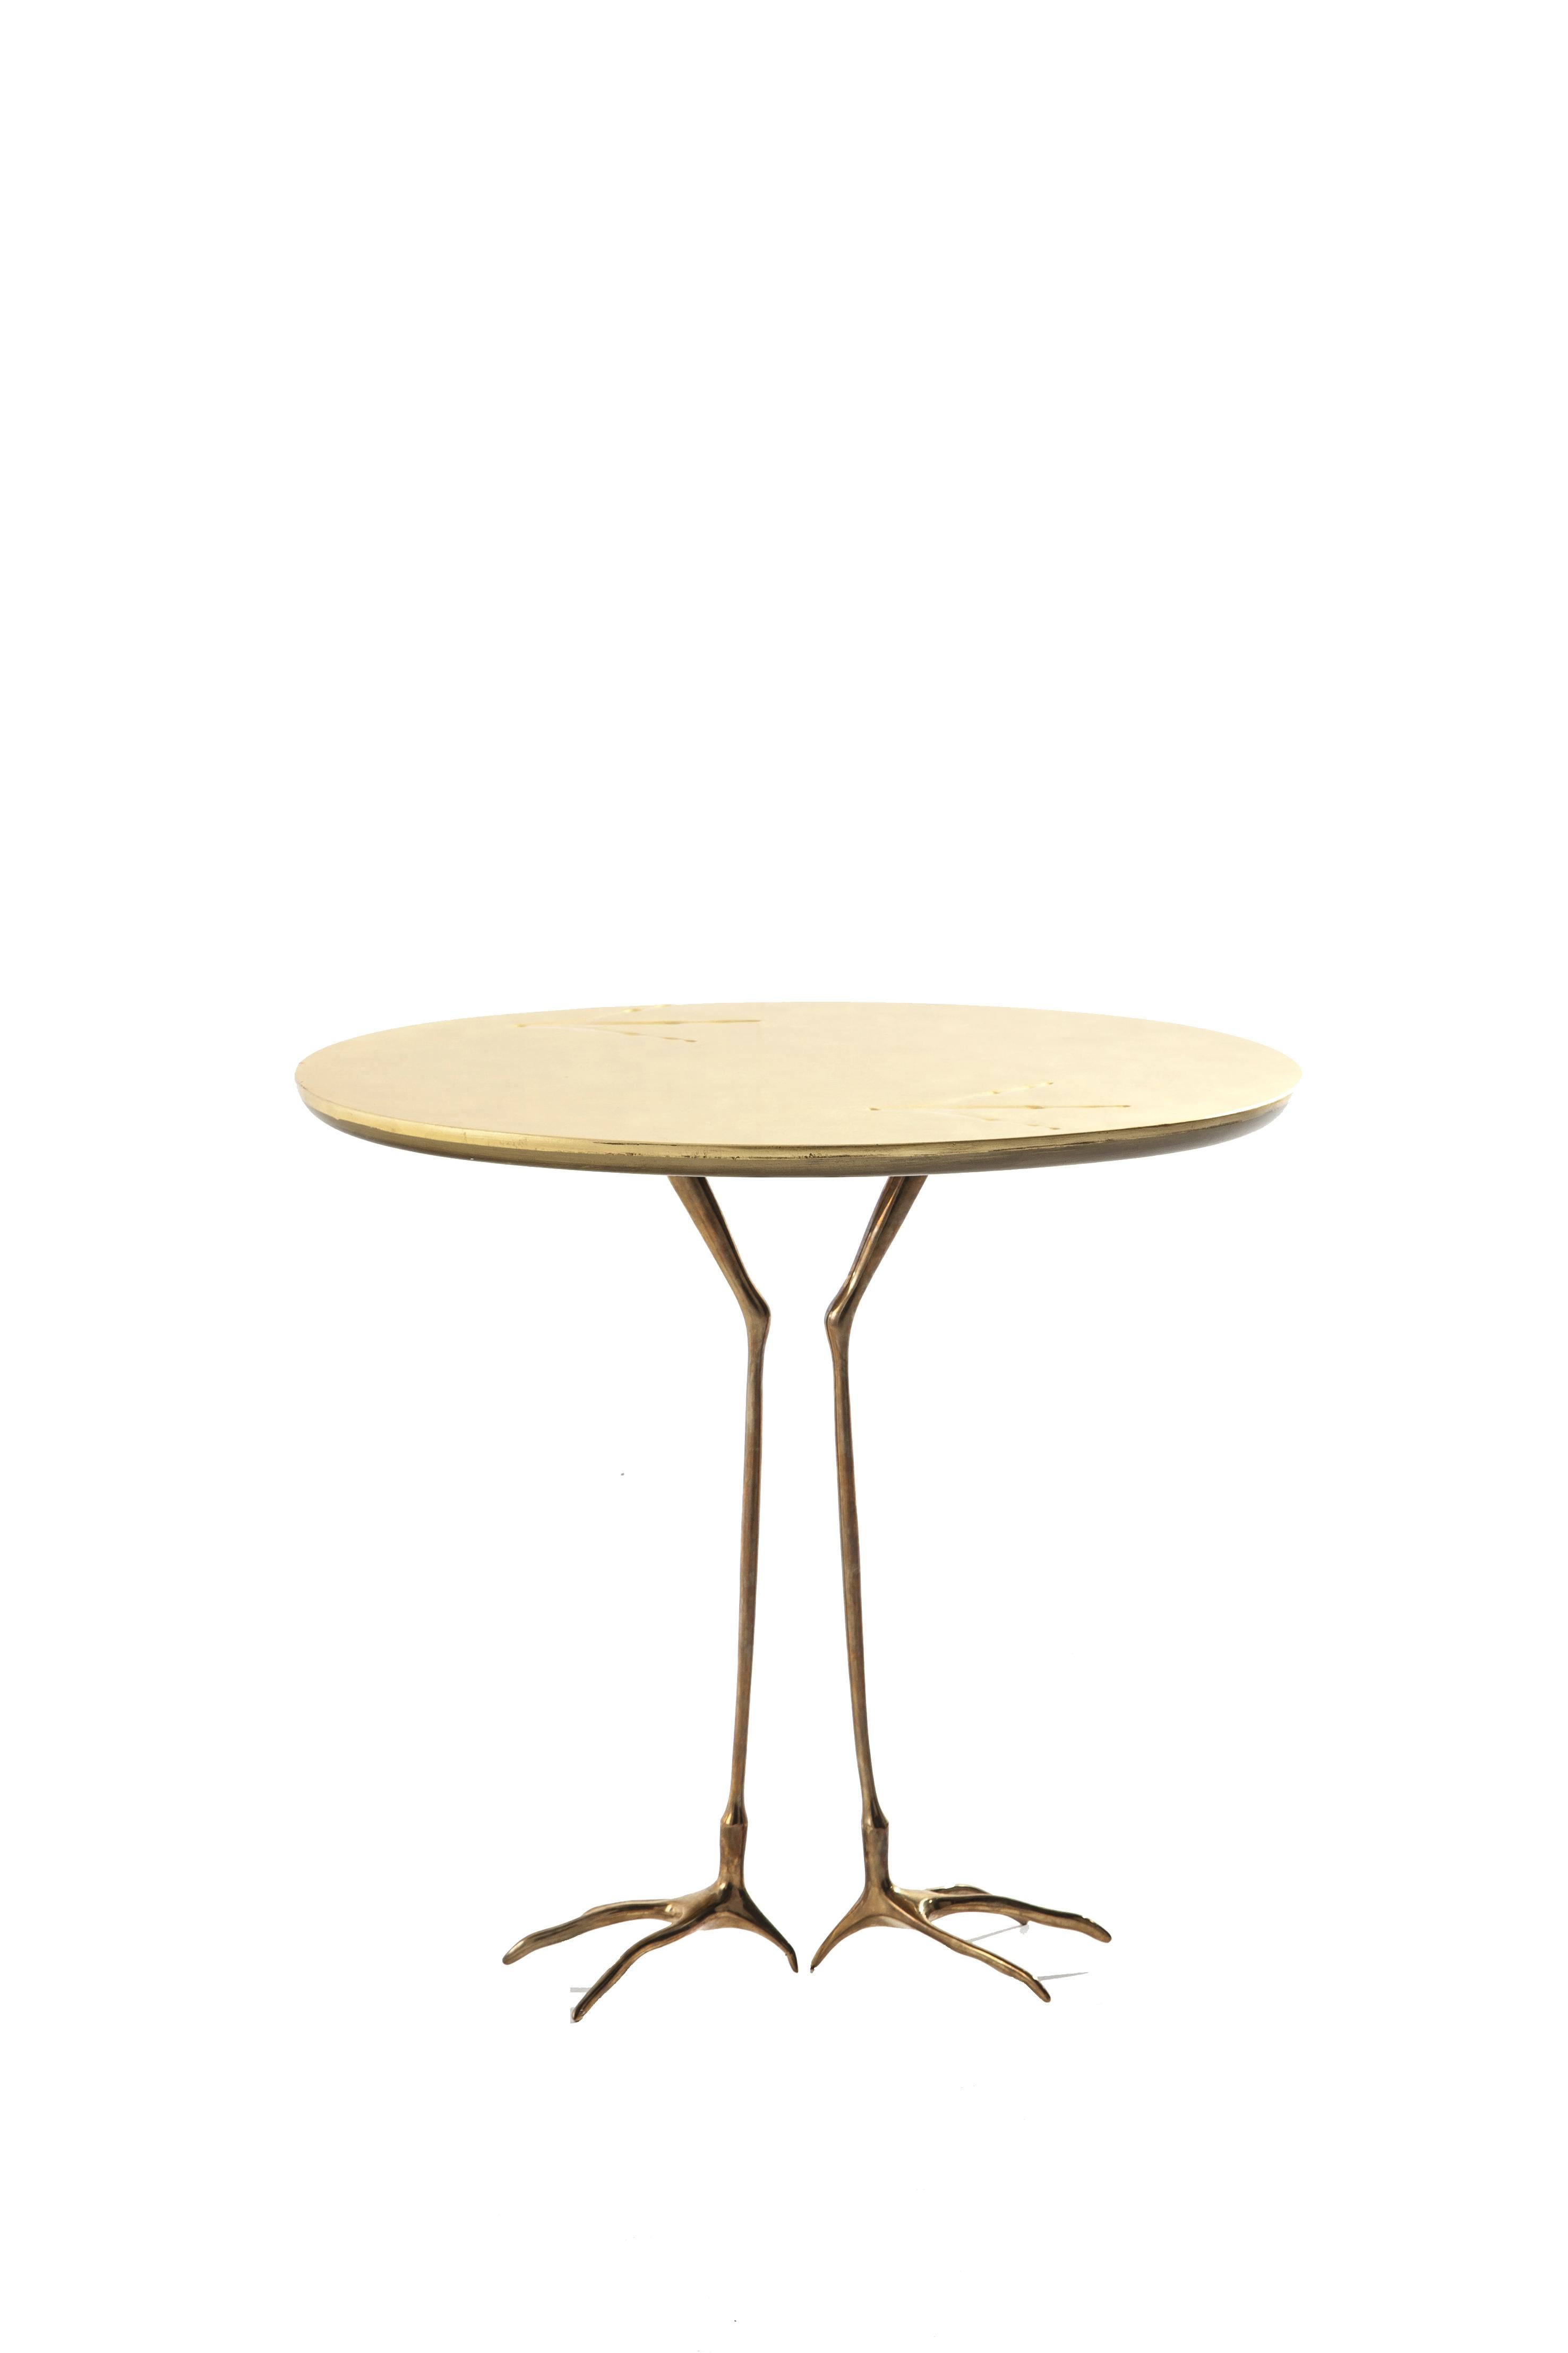 Mid-Century Modern Meret Oppenheim Traccia Sculptural Table For Sale